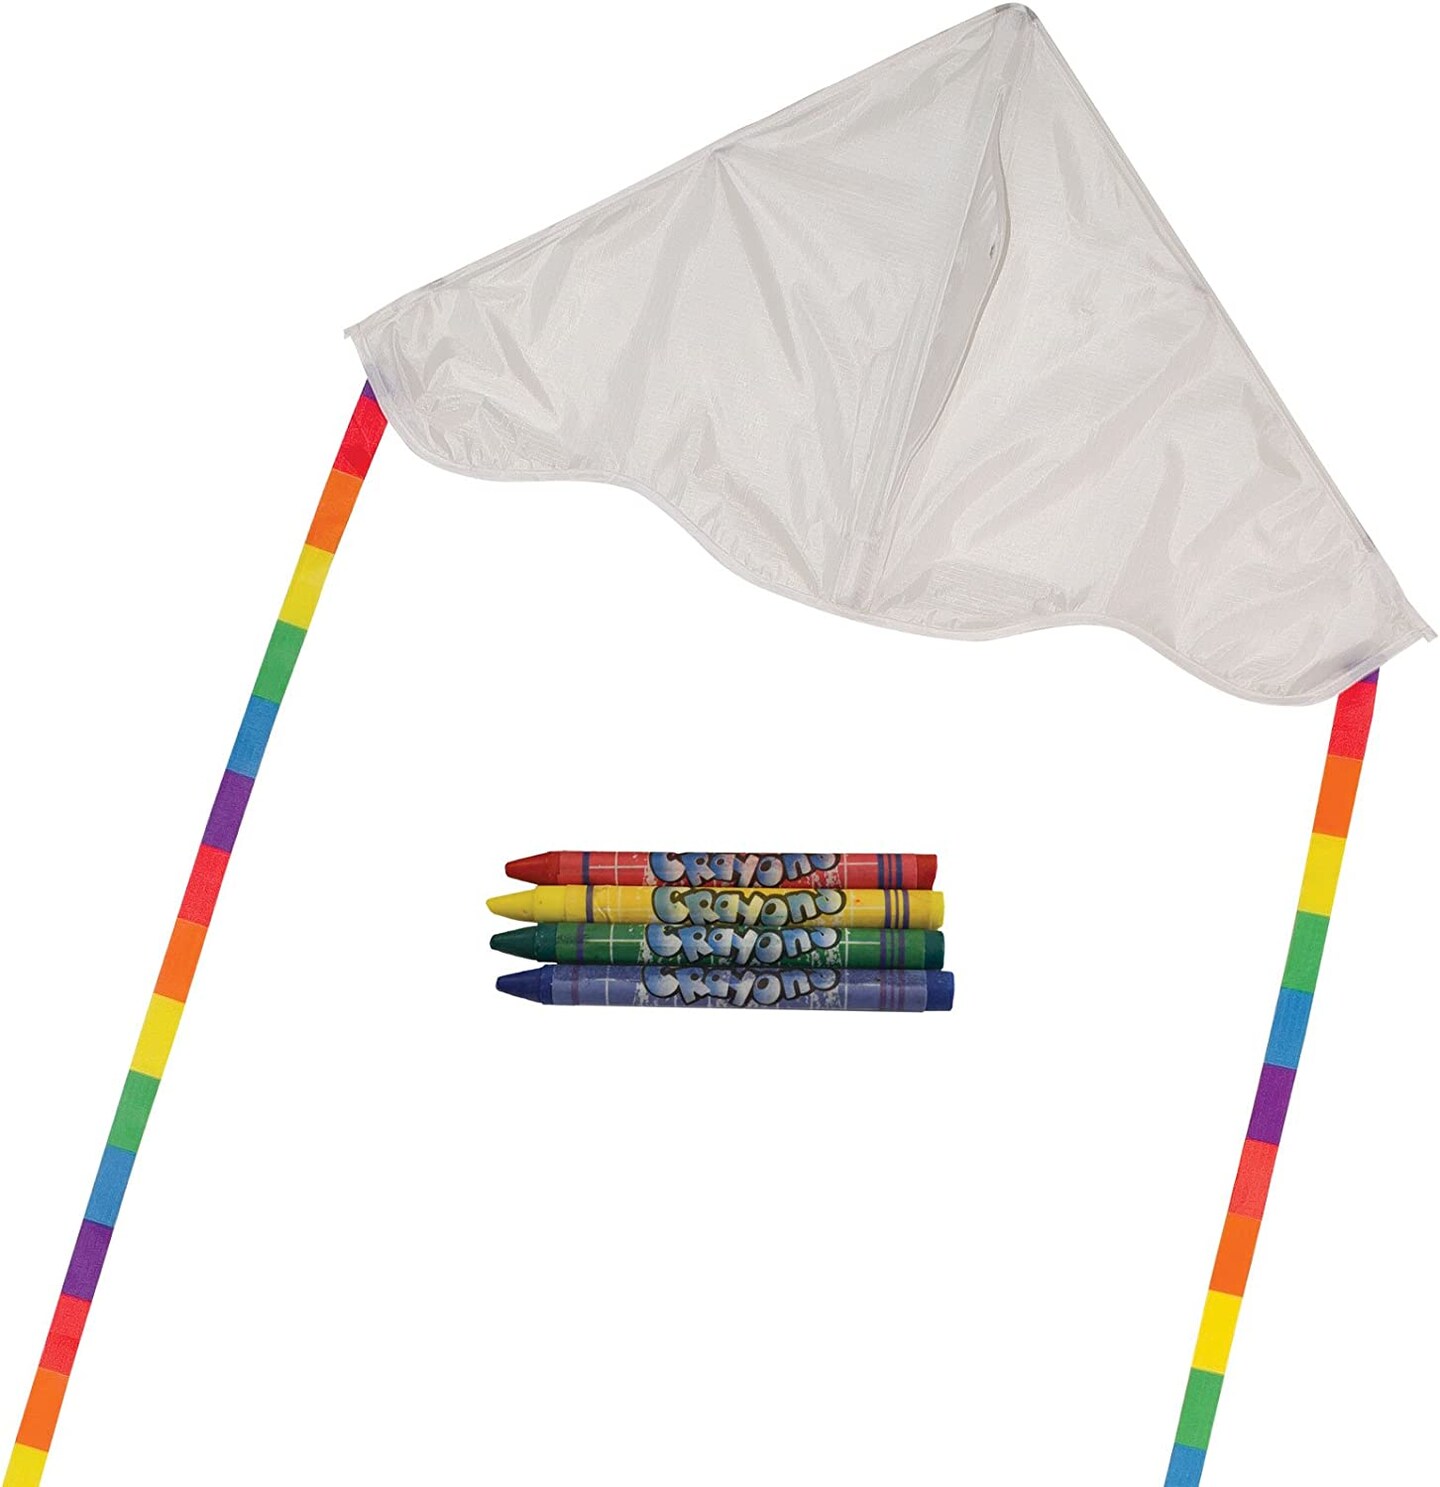 In the Breeze Coloring Delta 30 Inch Kite - 50 Piece Party Pack - Single Line Kite - Includes Crayons, Kite Line and Bag - Creative Fun for Kids and Adults,Butterfly Kite,3186-PACKS